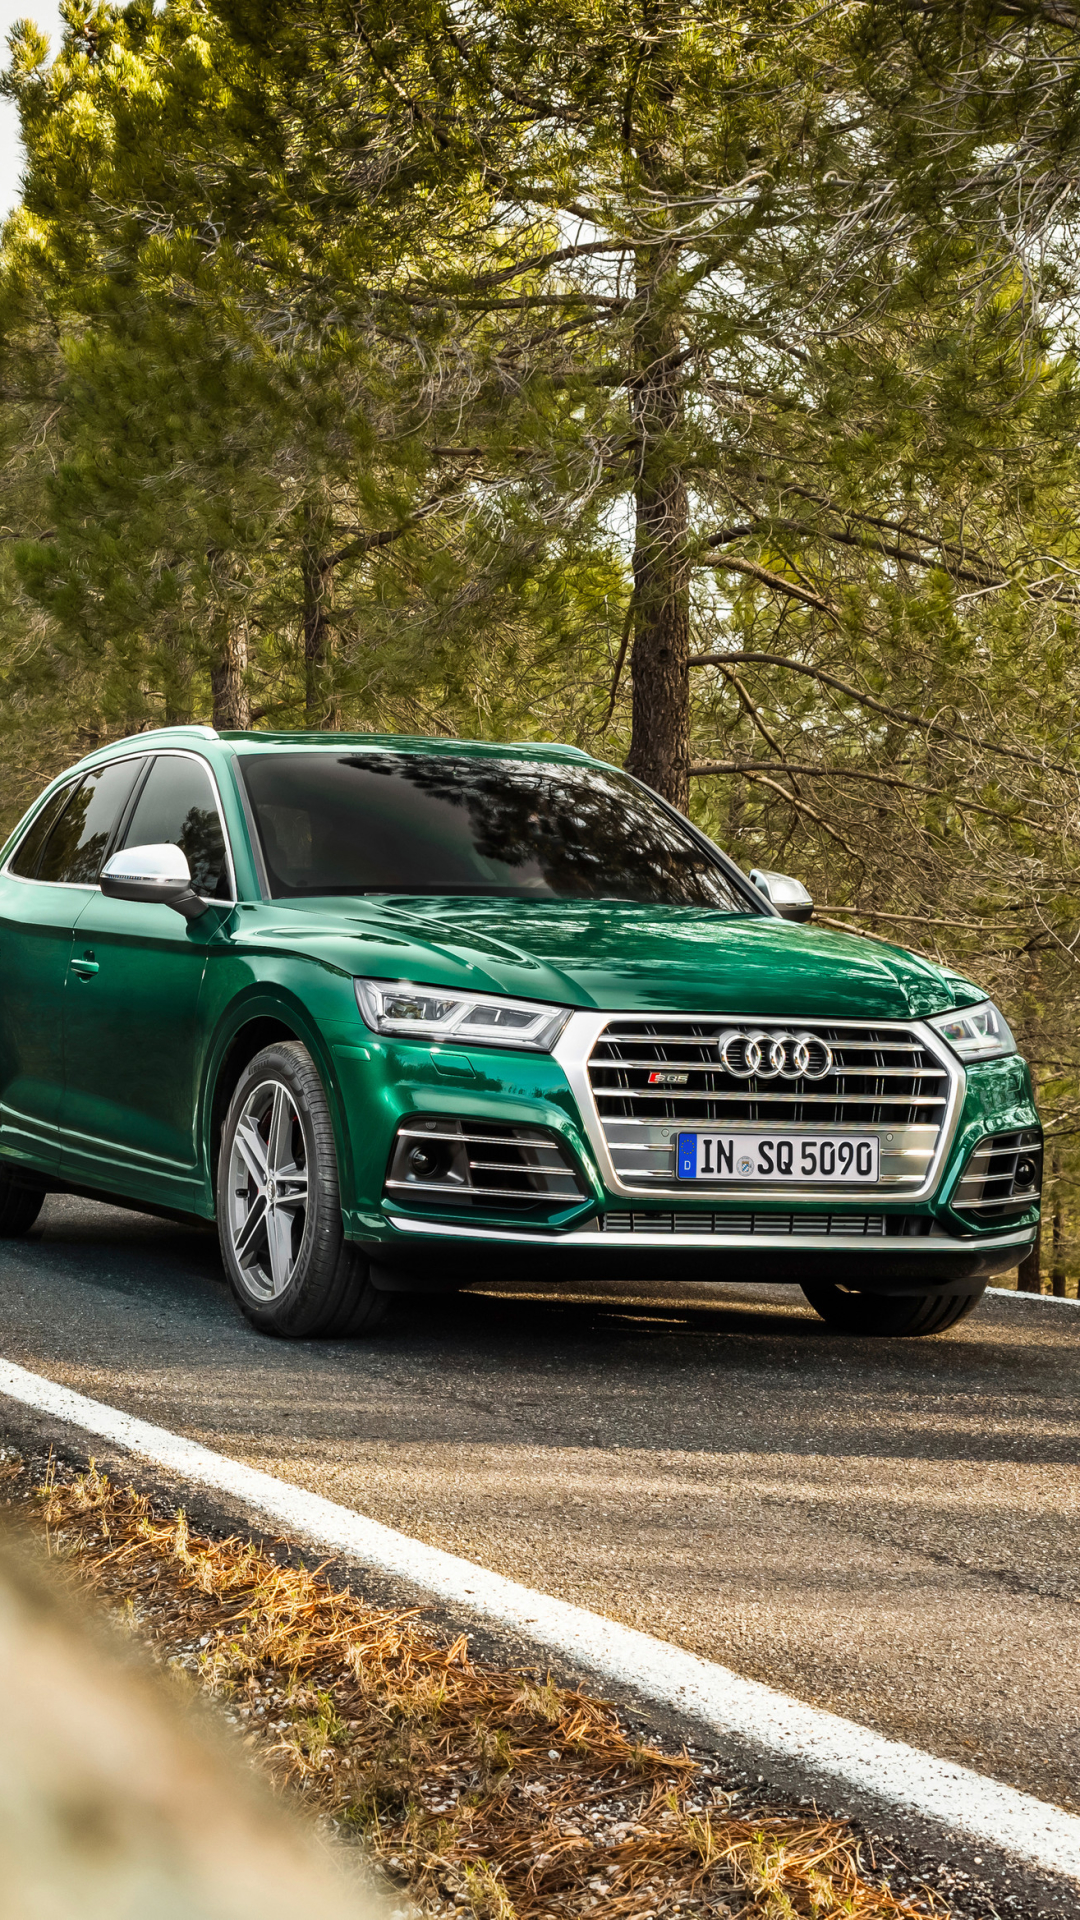 Best Audi Sq5 Background for mobile